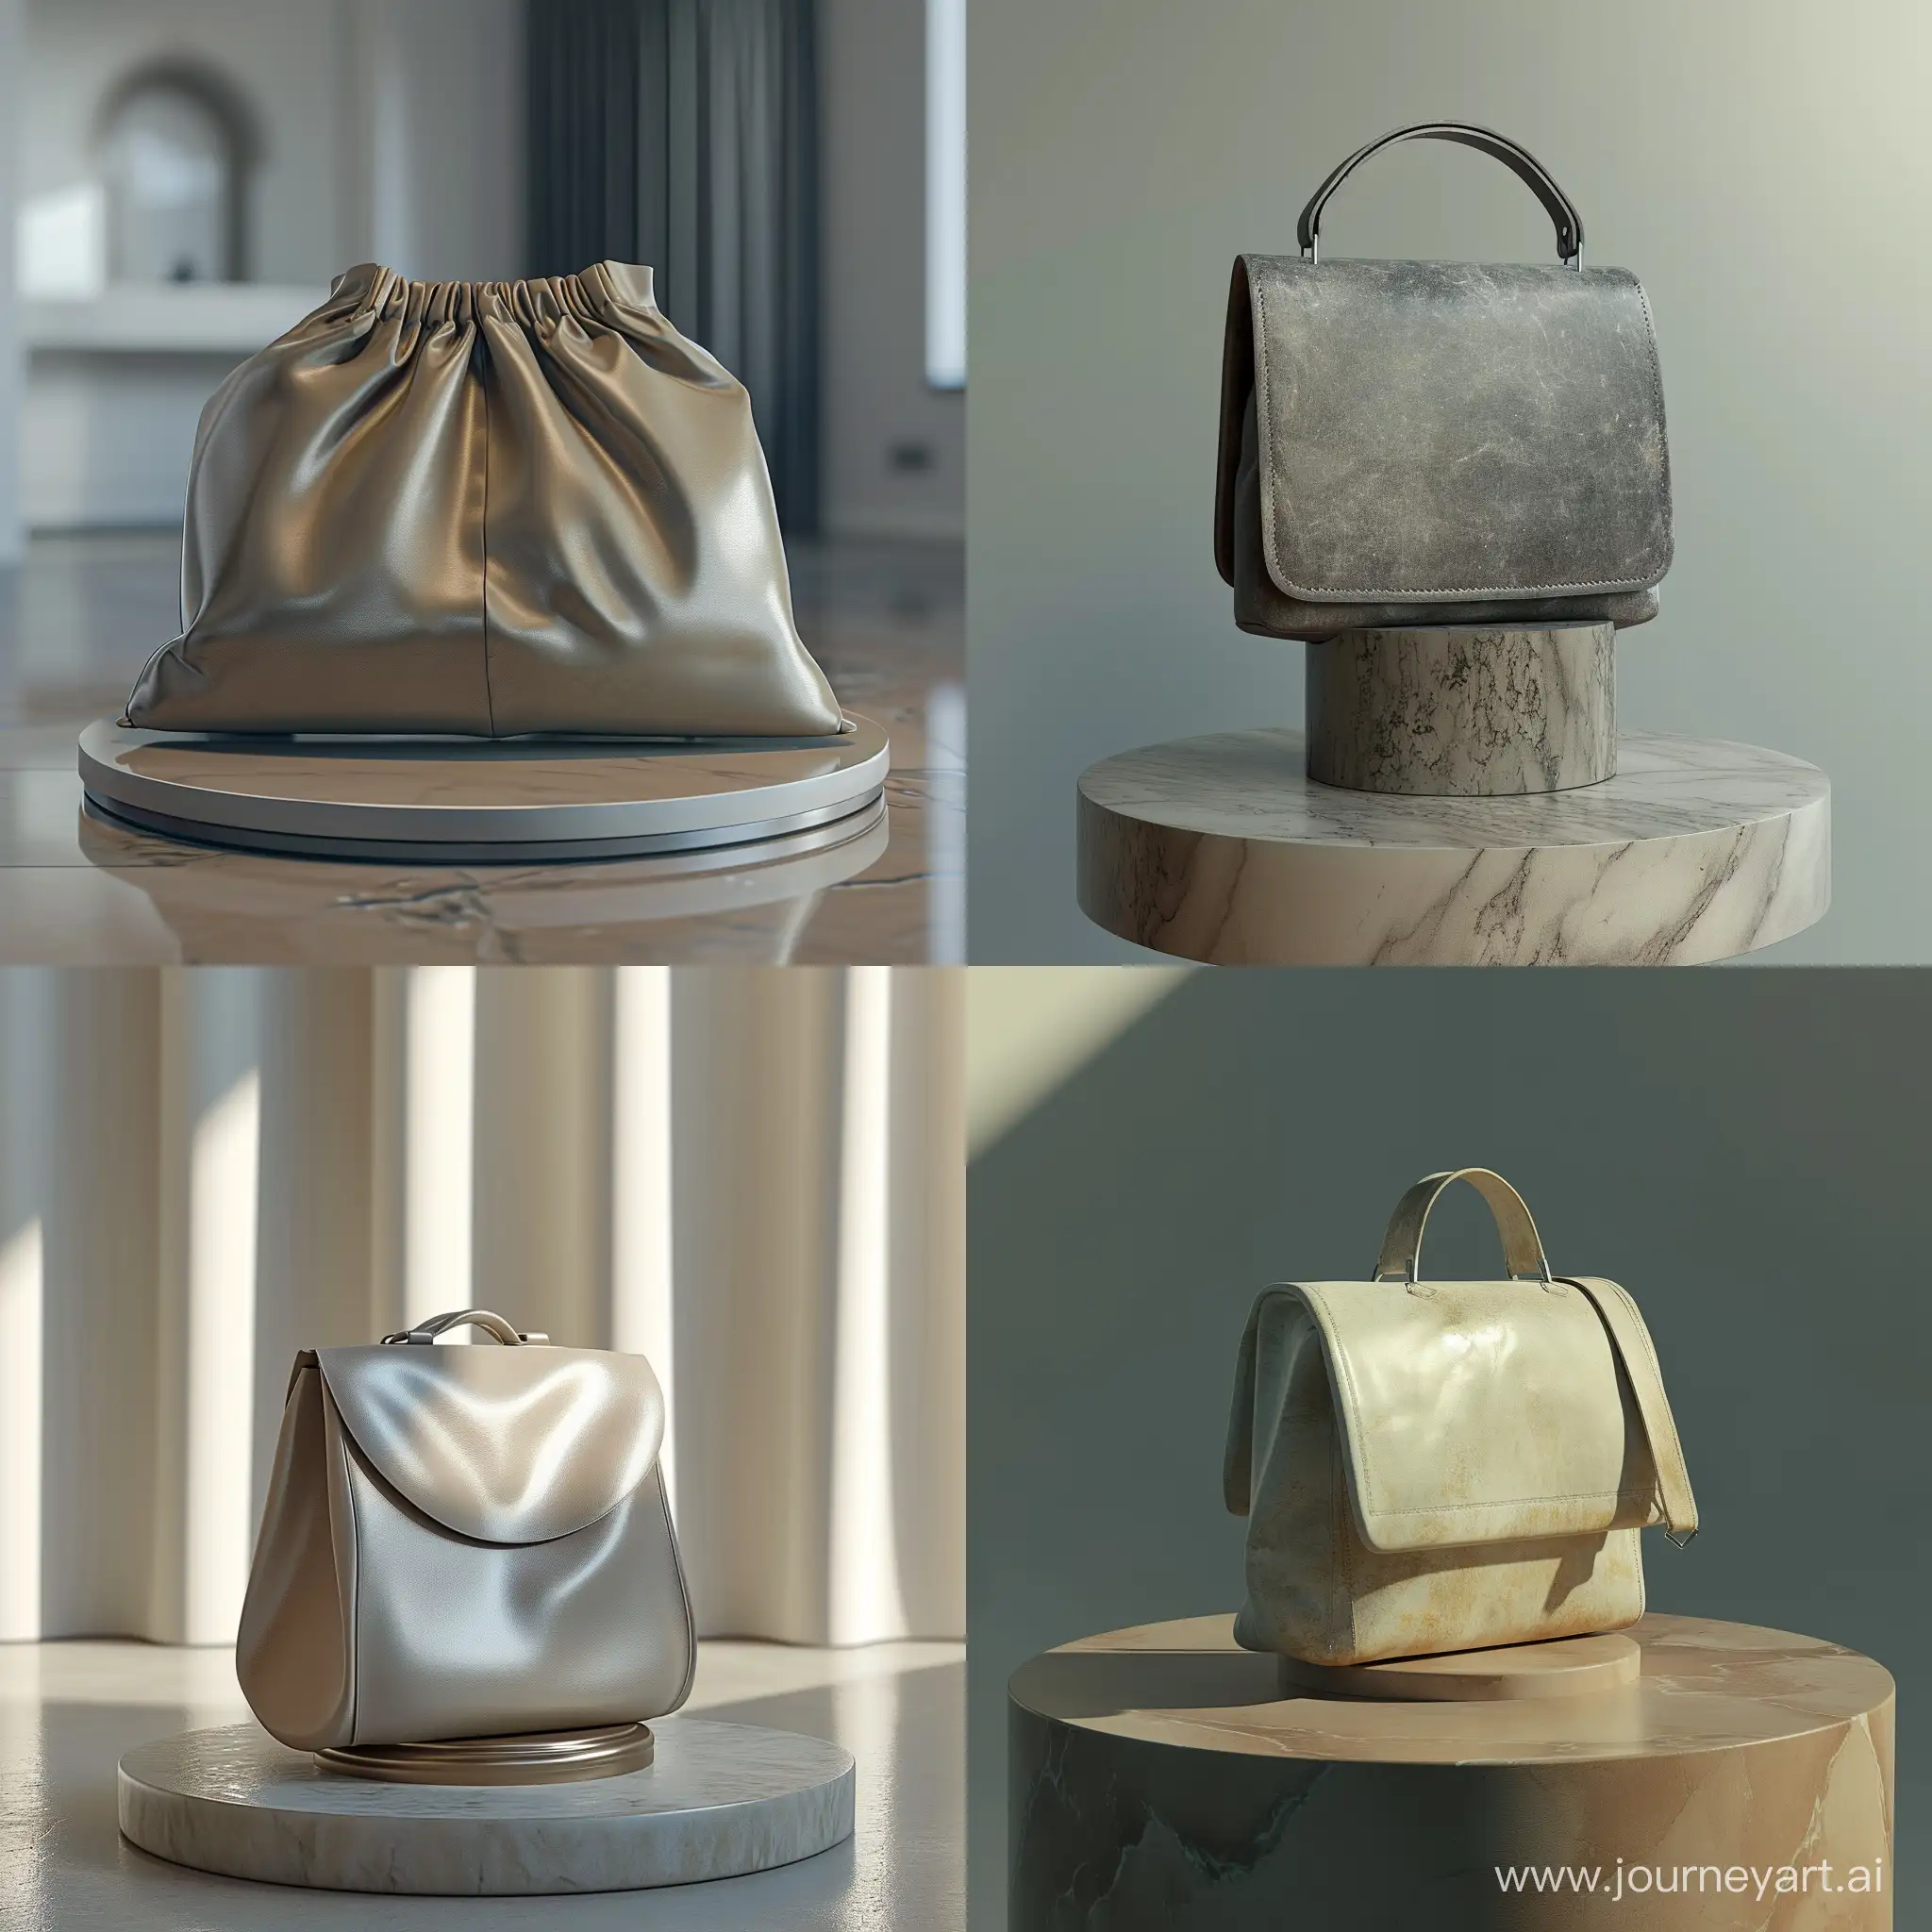 Stylish-Round-Stand-with-Photorealistic-Bag-Display